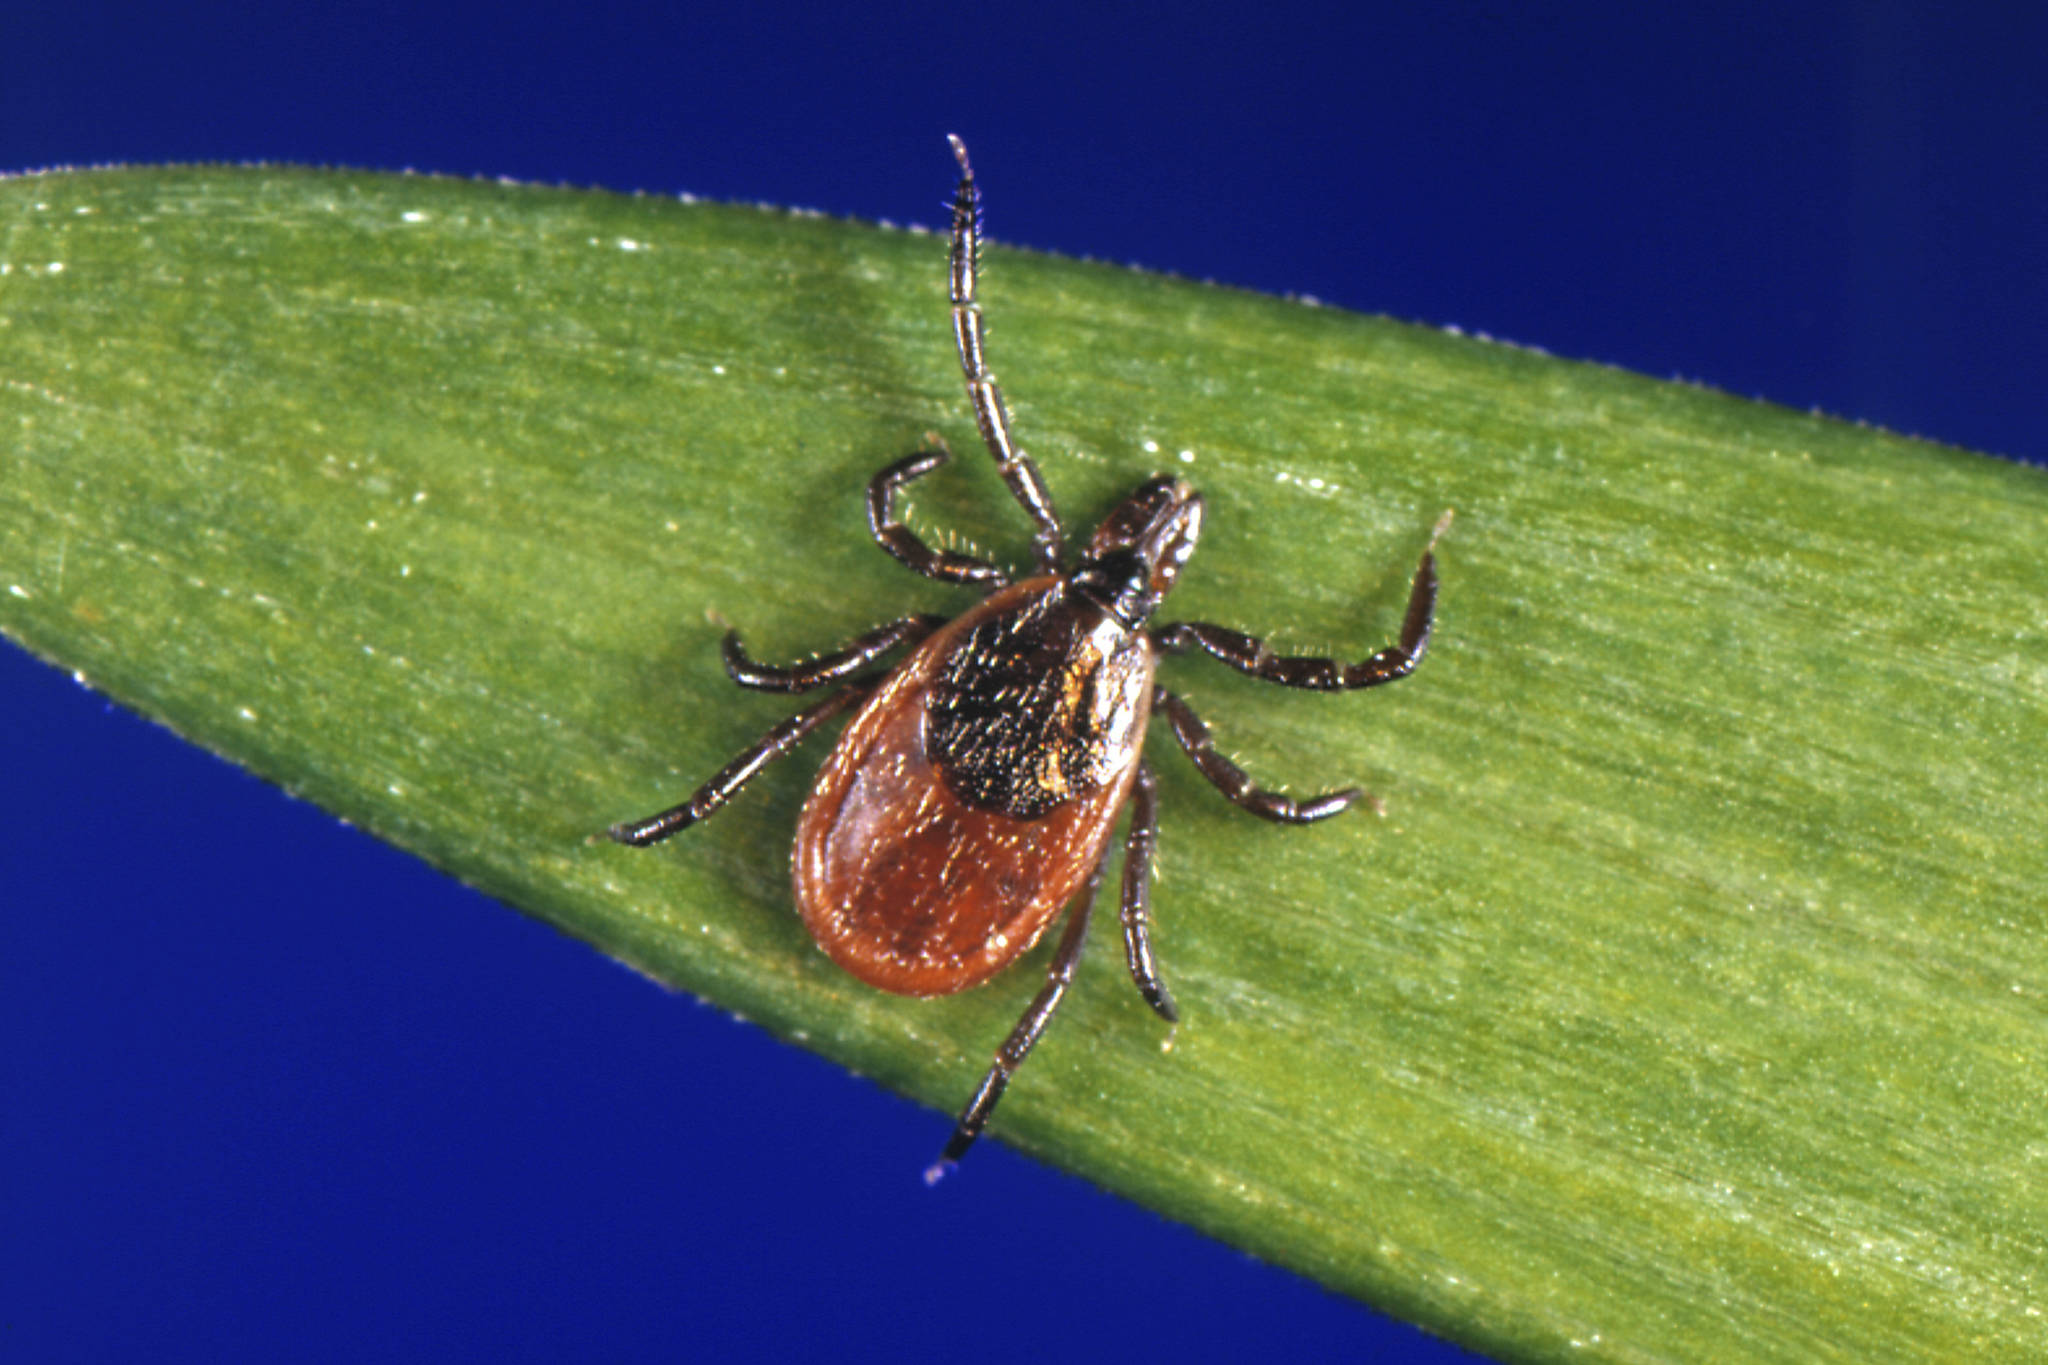 In this undated photo, a blacklegged tick, also known as a deer tick, rests on a plant. Non-native ticks, including some with significant veterinary and medical importance, are showing up in Alaska and health officials fear a warmer climate may allow them to become established. A collaborative project between the University of Alaska and state wildlife and veterinary officials is working to understand the risk of non-native ticks such as blacklegged ticks and pathogens they could carry. (U.S. Centers for Disease Control and Prevention)